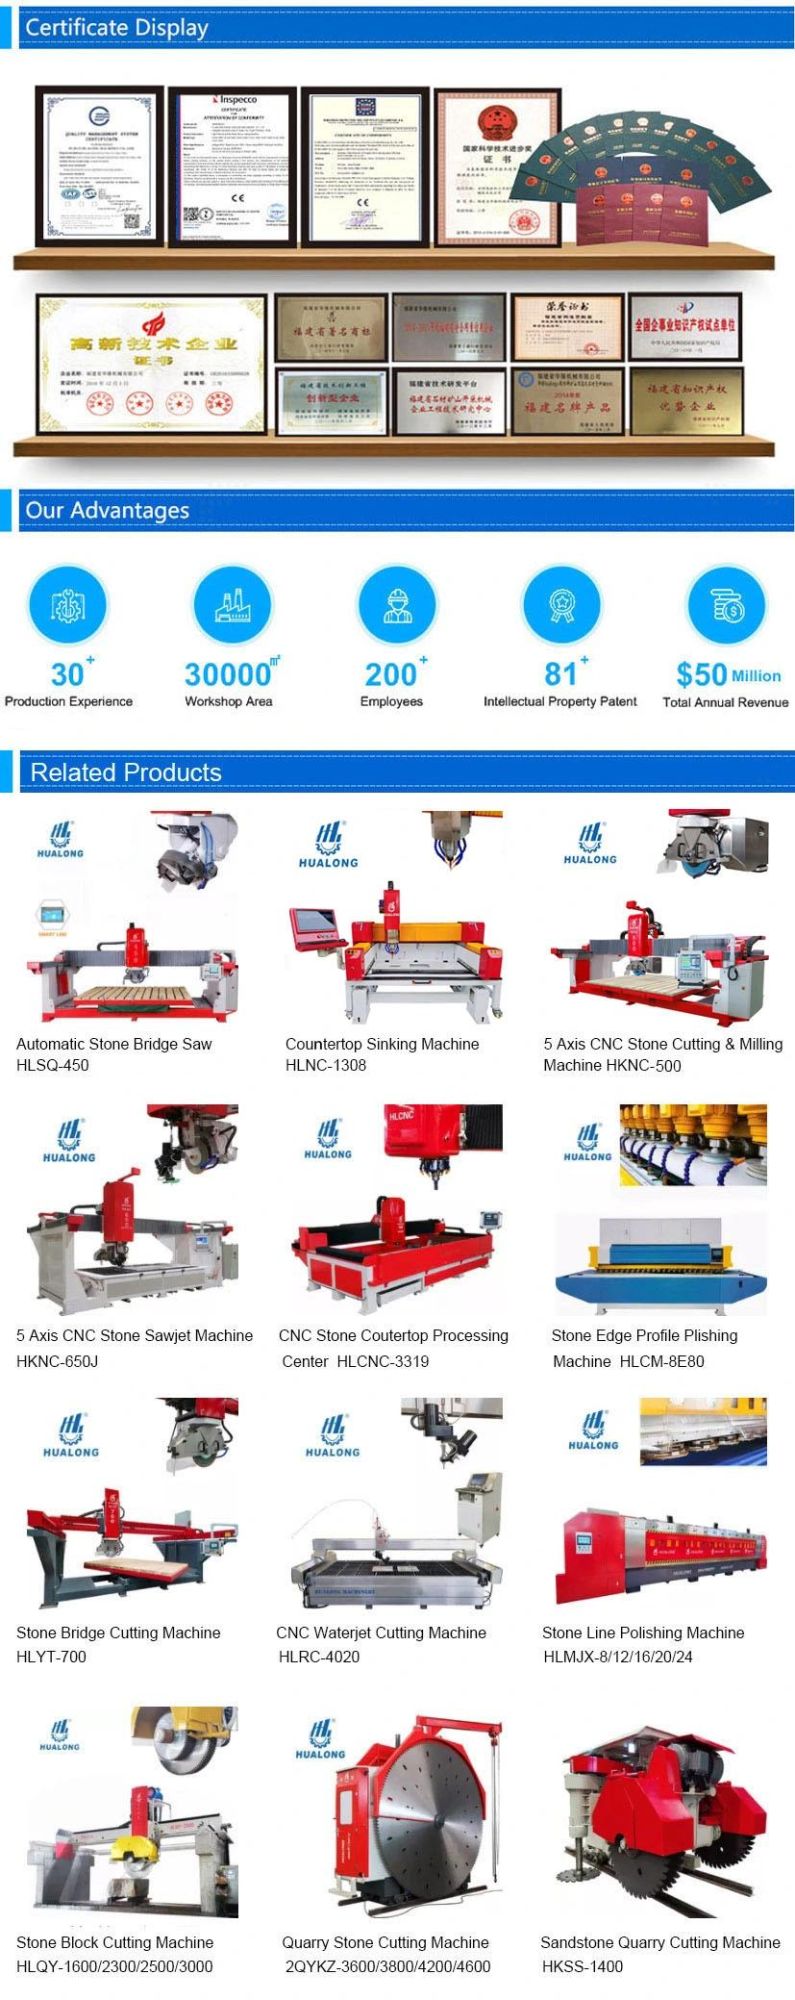 5 Axis CNC Waterjet Stone Cutting Machine for Glass Metal Ceramic Cut, Tiles Countertop Sink Cutting by Water Abrasive, 220V/380V Online Remote Control